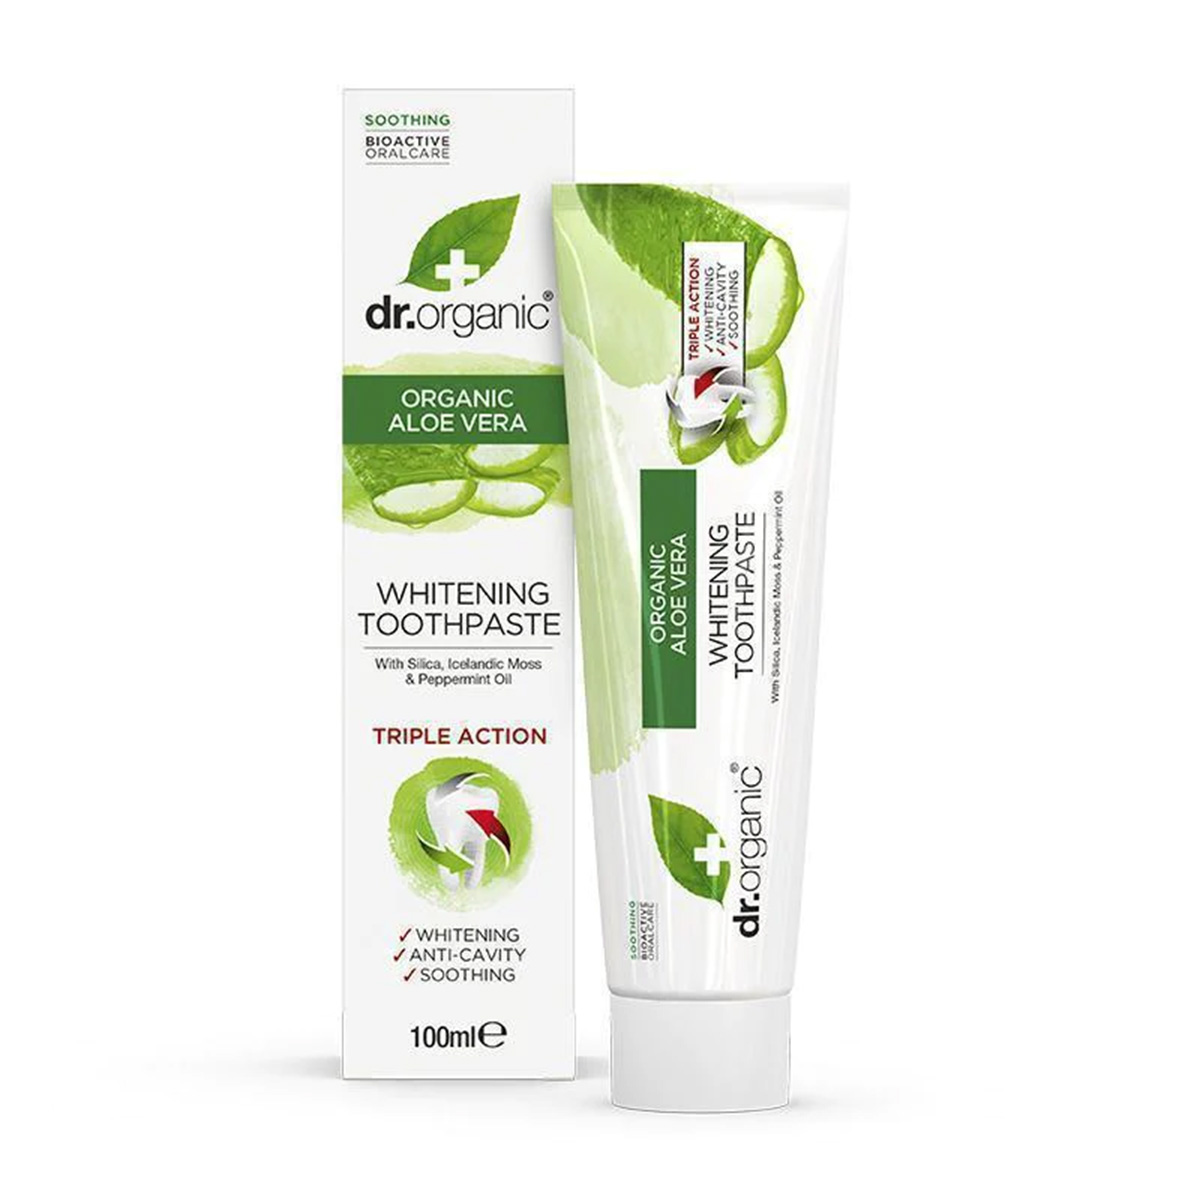 Dr Organic Whitening Toothpaste, Aloe Vera, 100 ML, Helps Get Rid of Tooth Discoloration